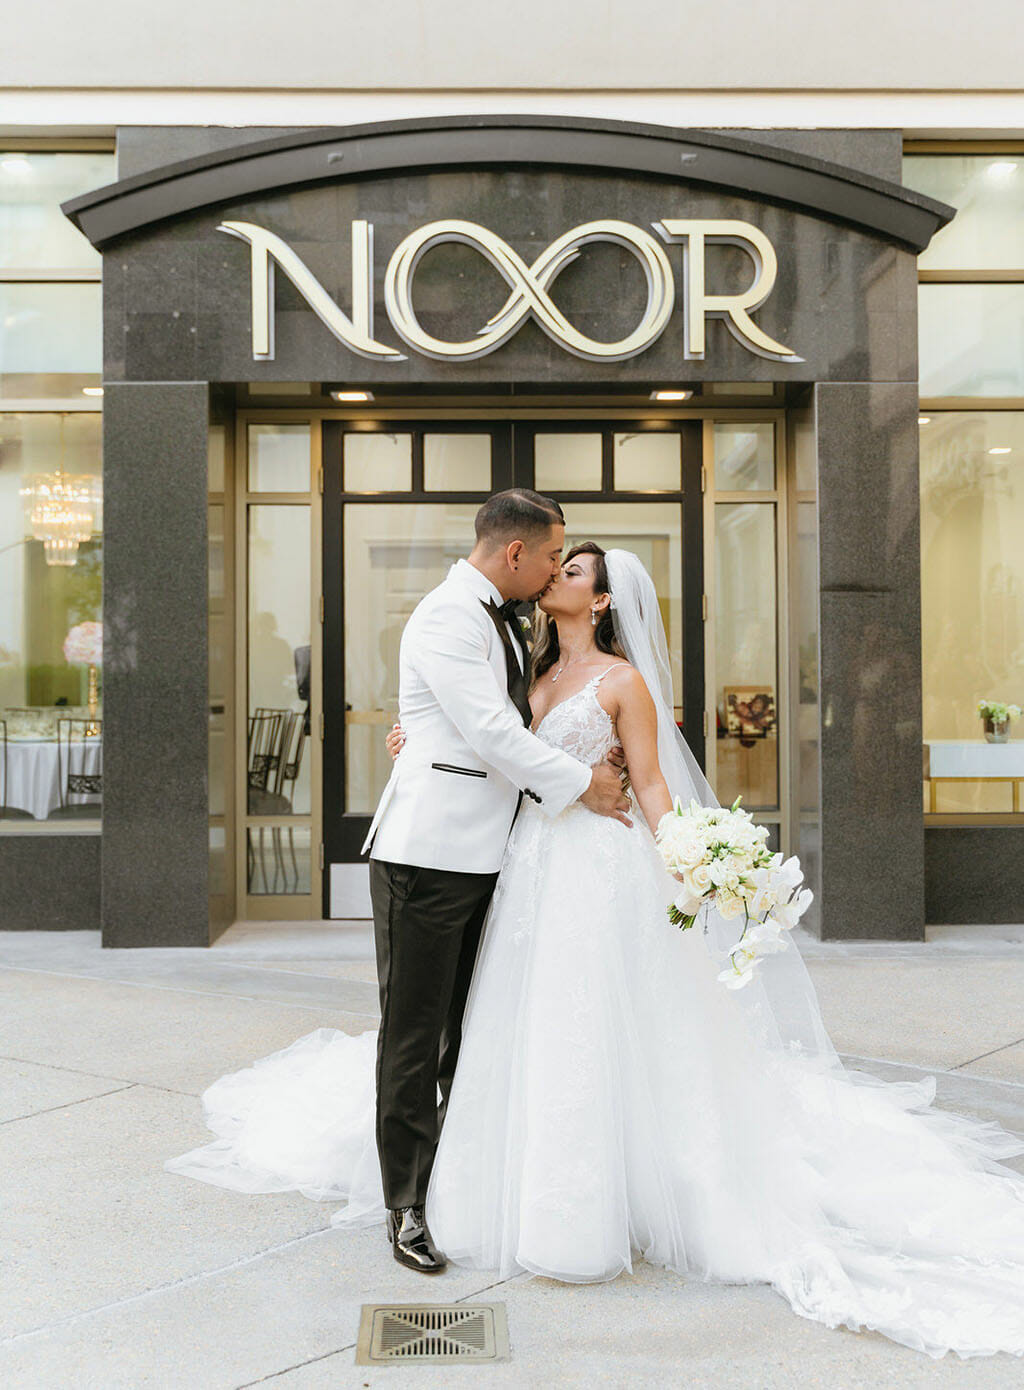 NOOR wedding couple kissing in front of pasadena banquet hall and event spaces with NOOR sign behind them